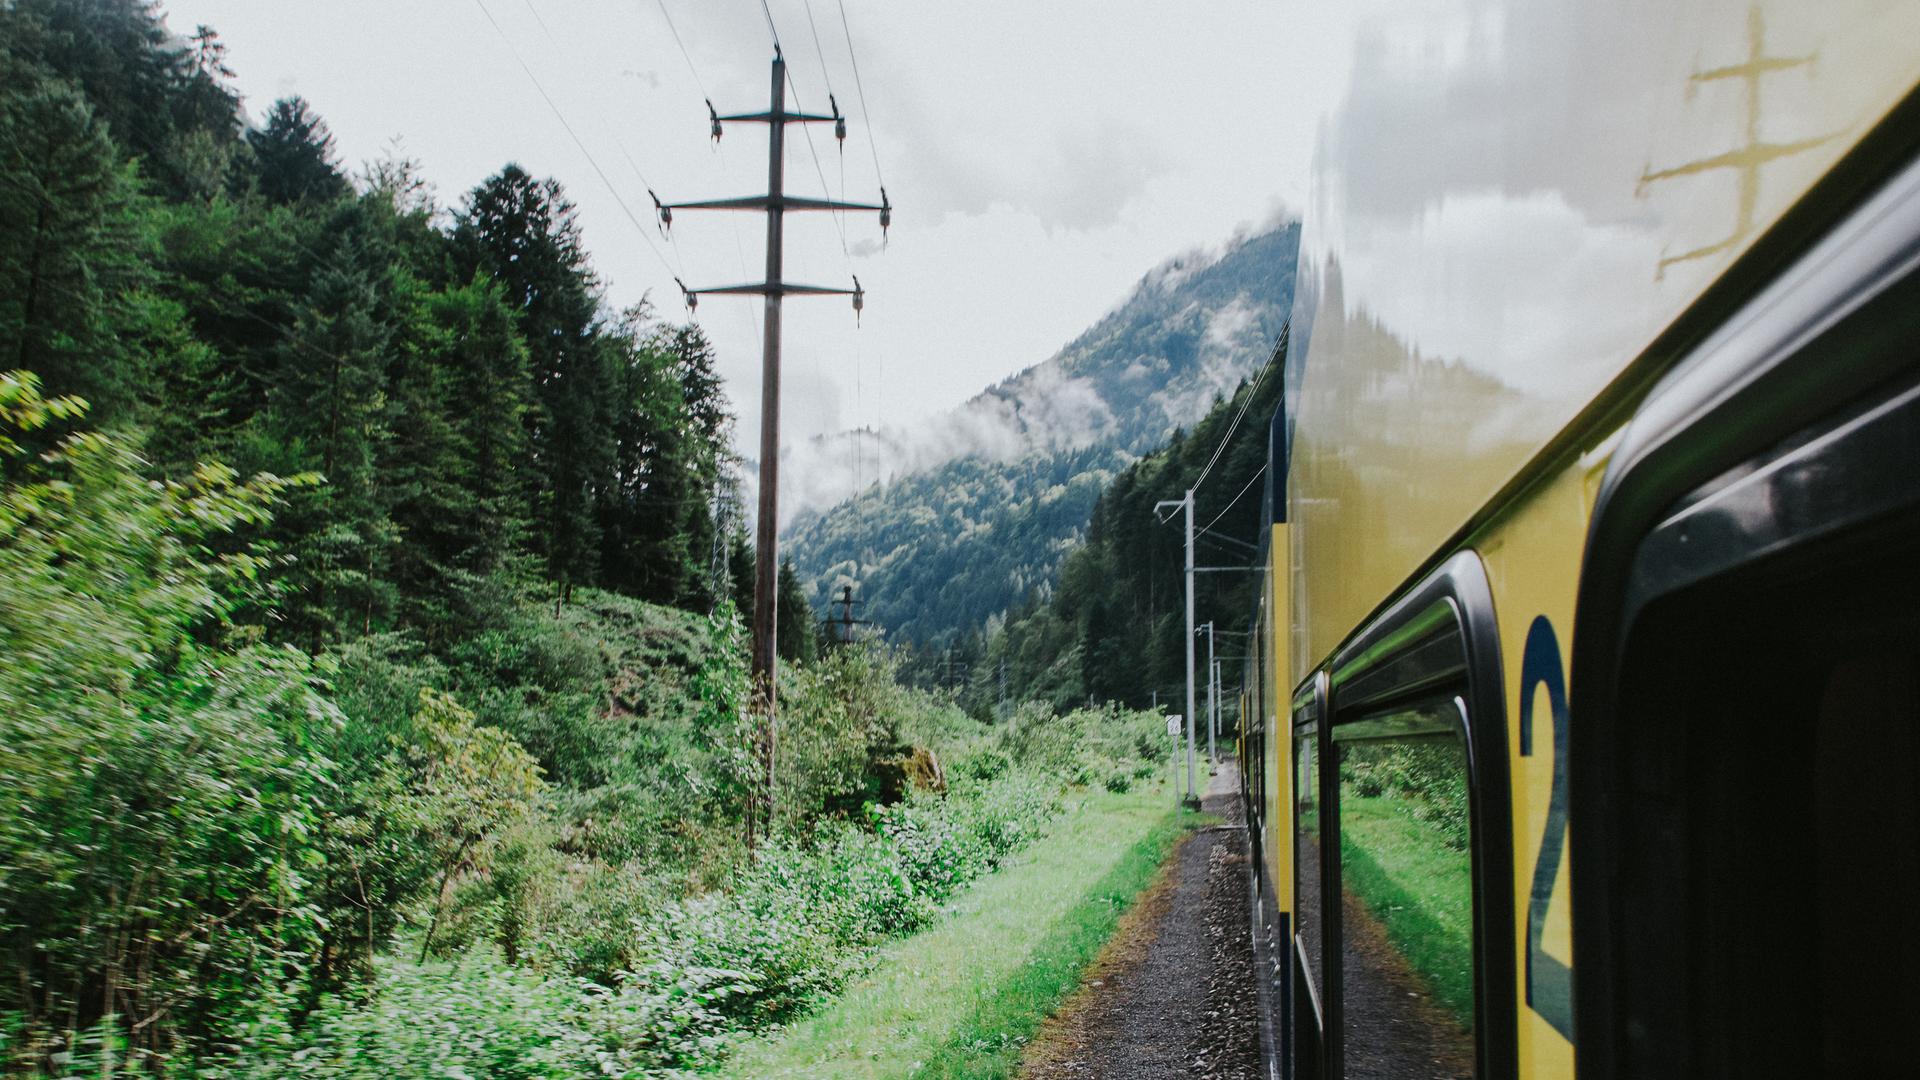 You can visit 33 countries on a digital interrail pass